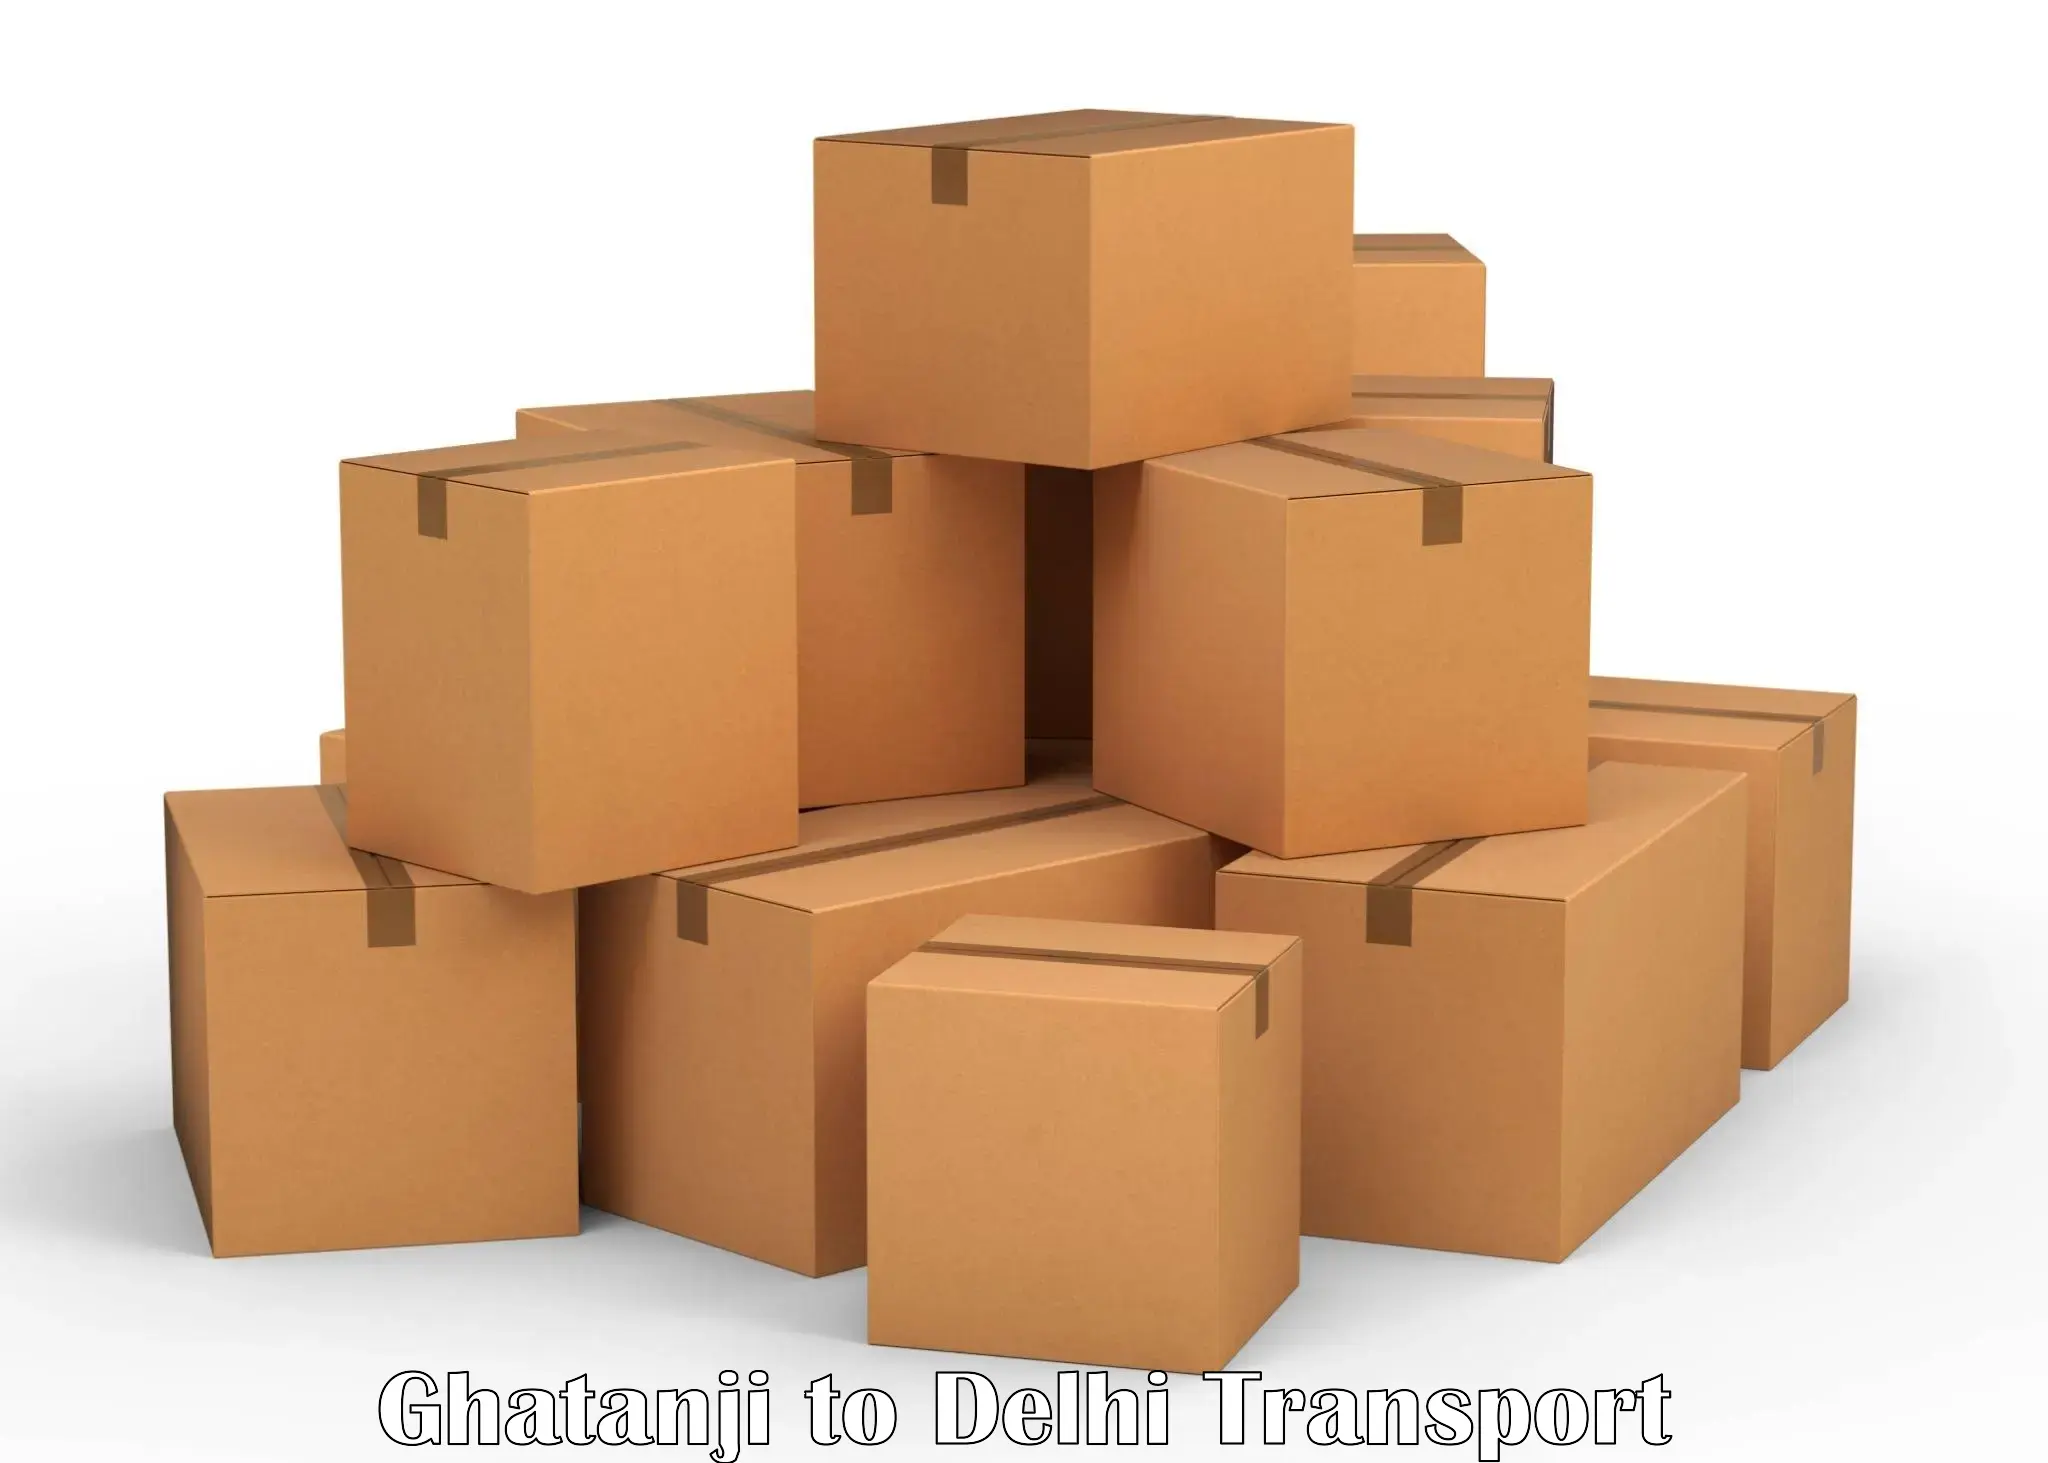 Container transport service Ghatanji to Delhi